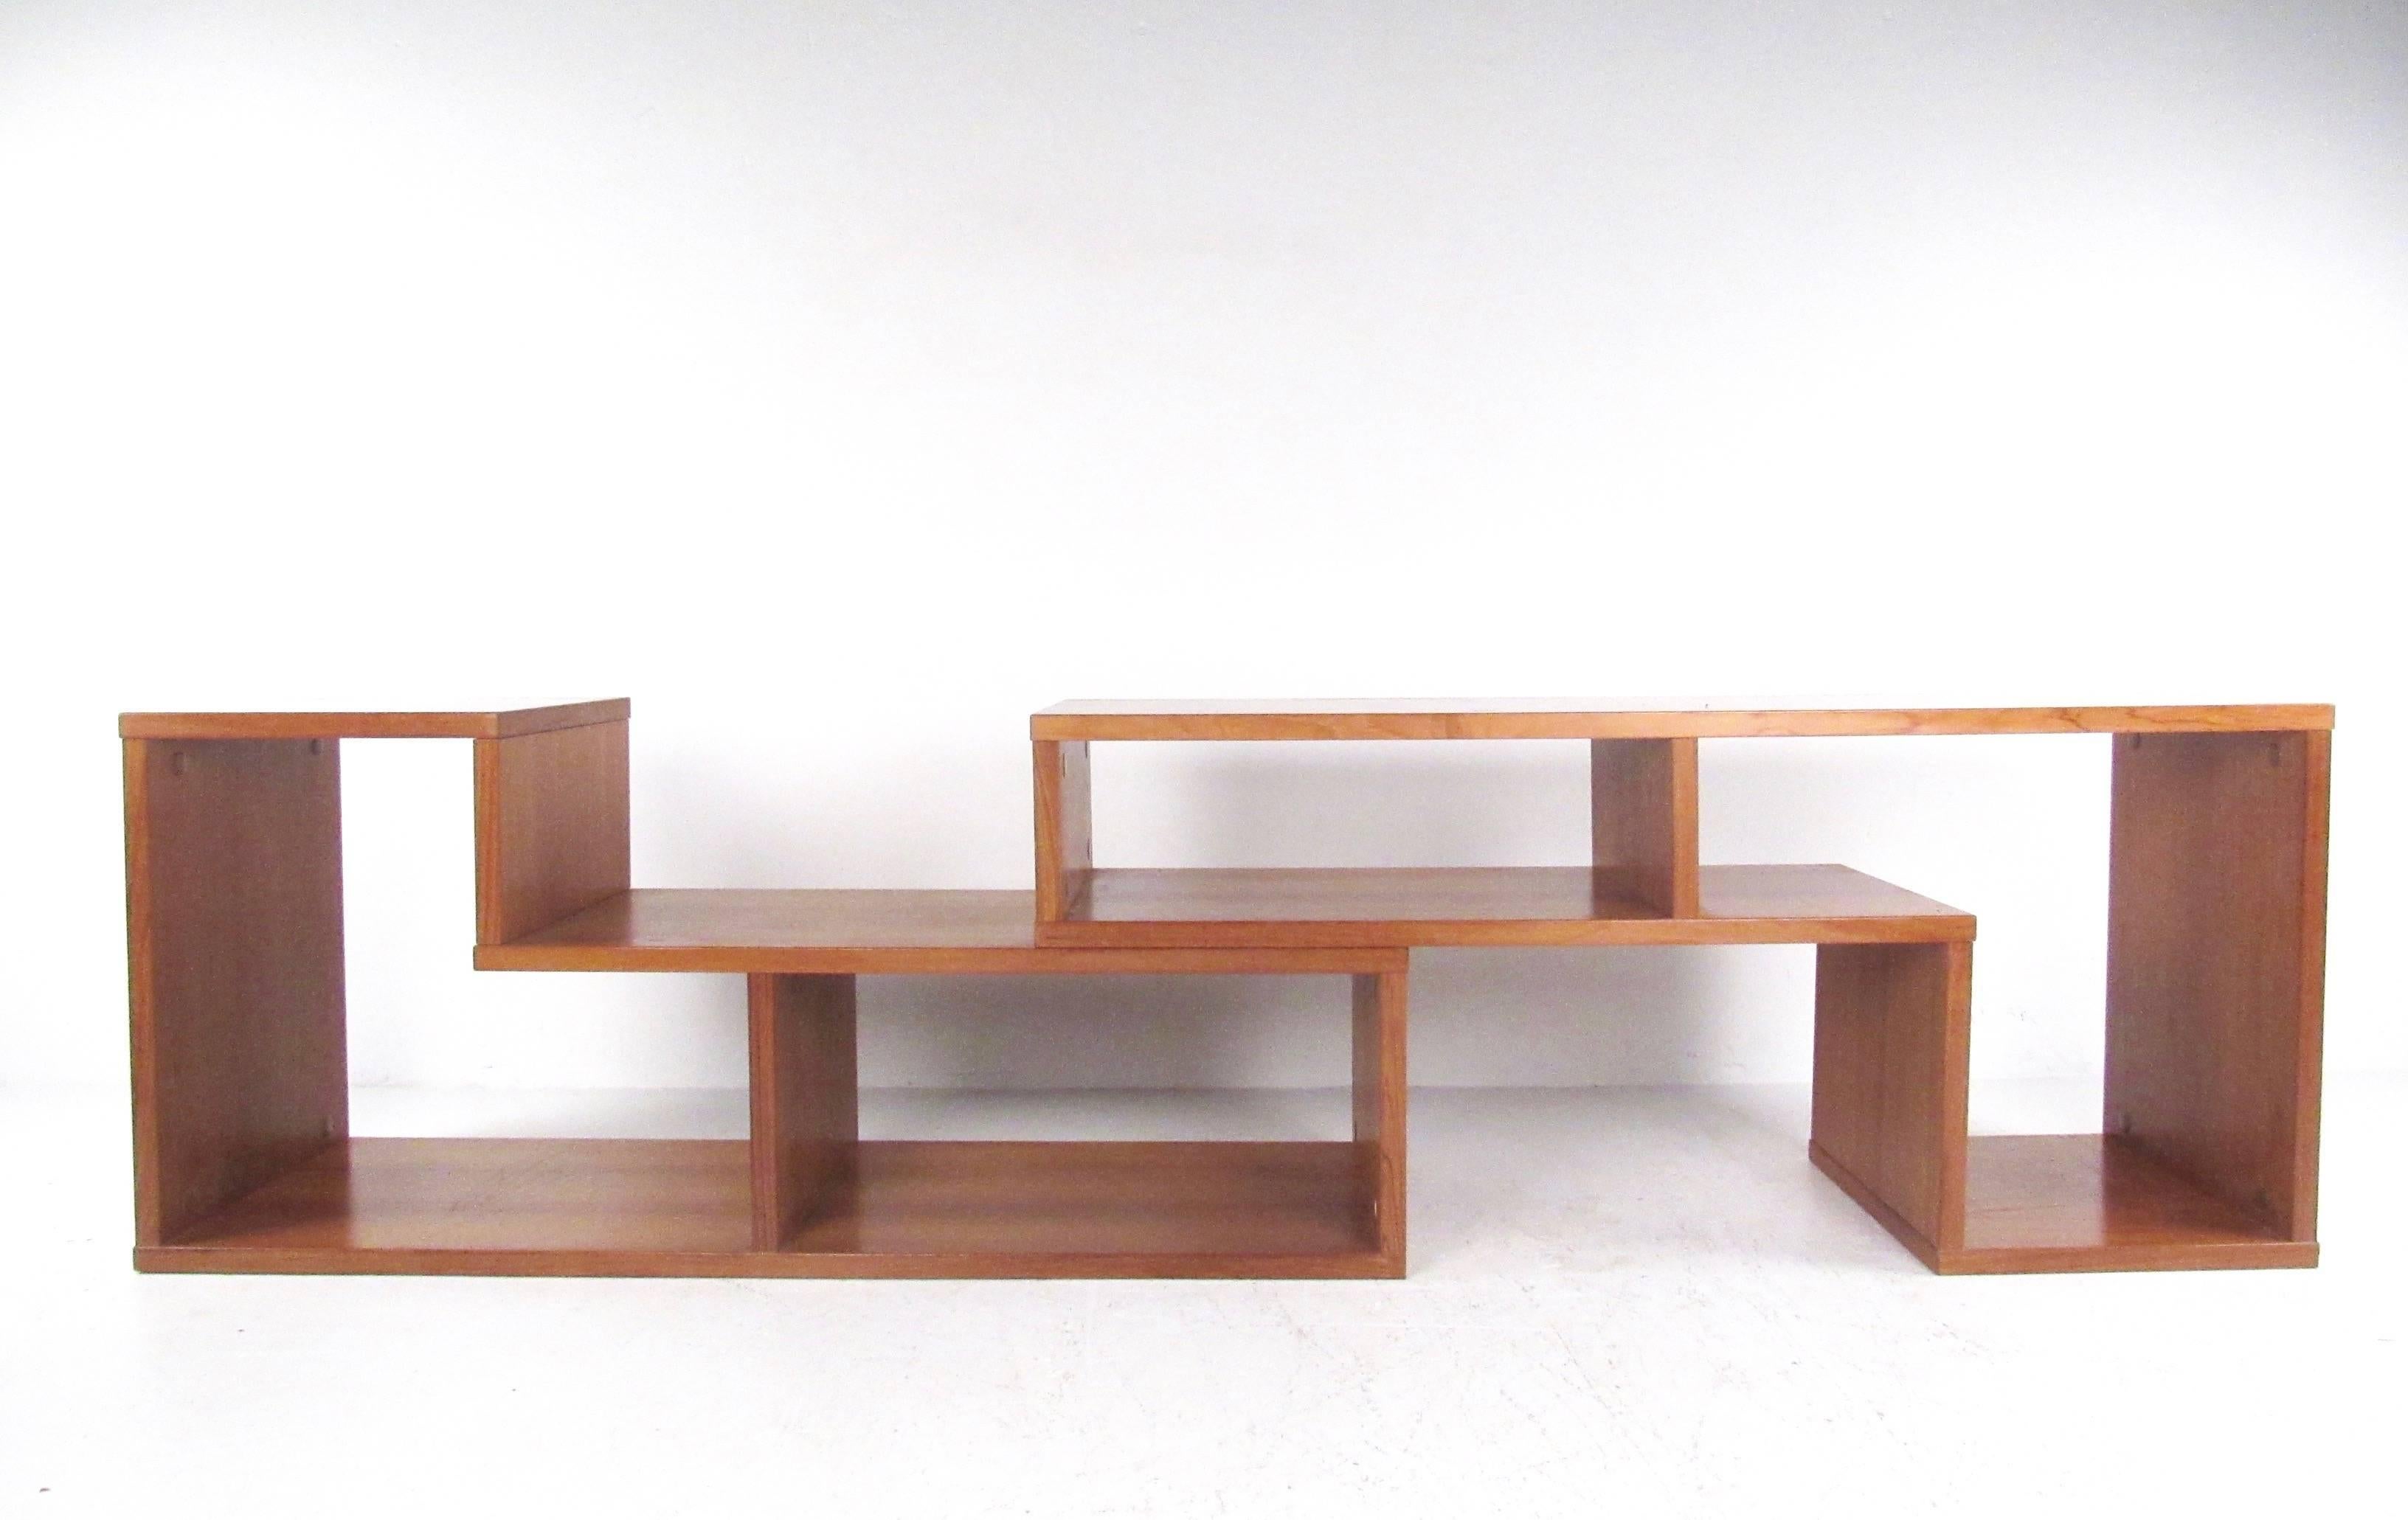 This matching pair of vintage teak bookshelves stack together to form a unique storage or display space for any home or office. Perfect for use as a TV console, bookshelf or general storage. Please confirm item location (NY or NJ).